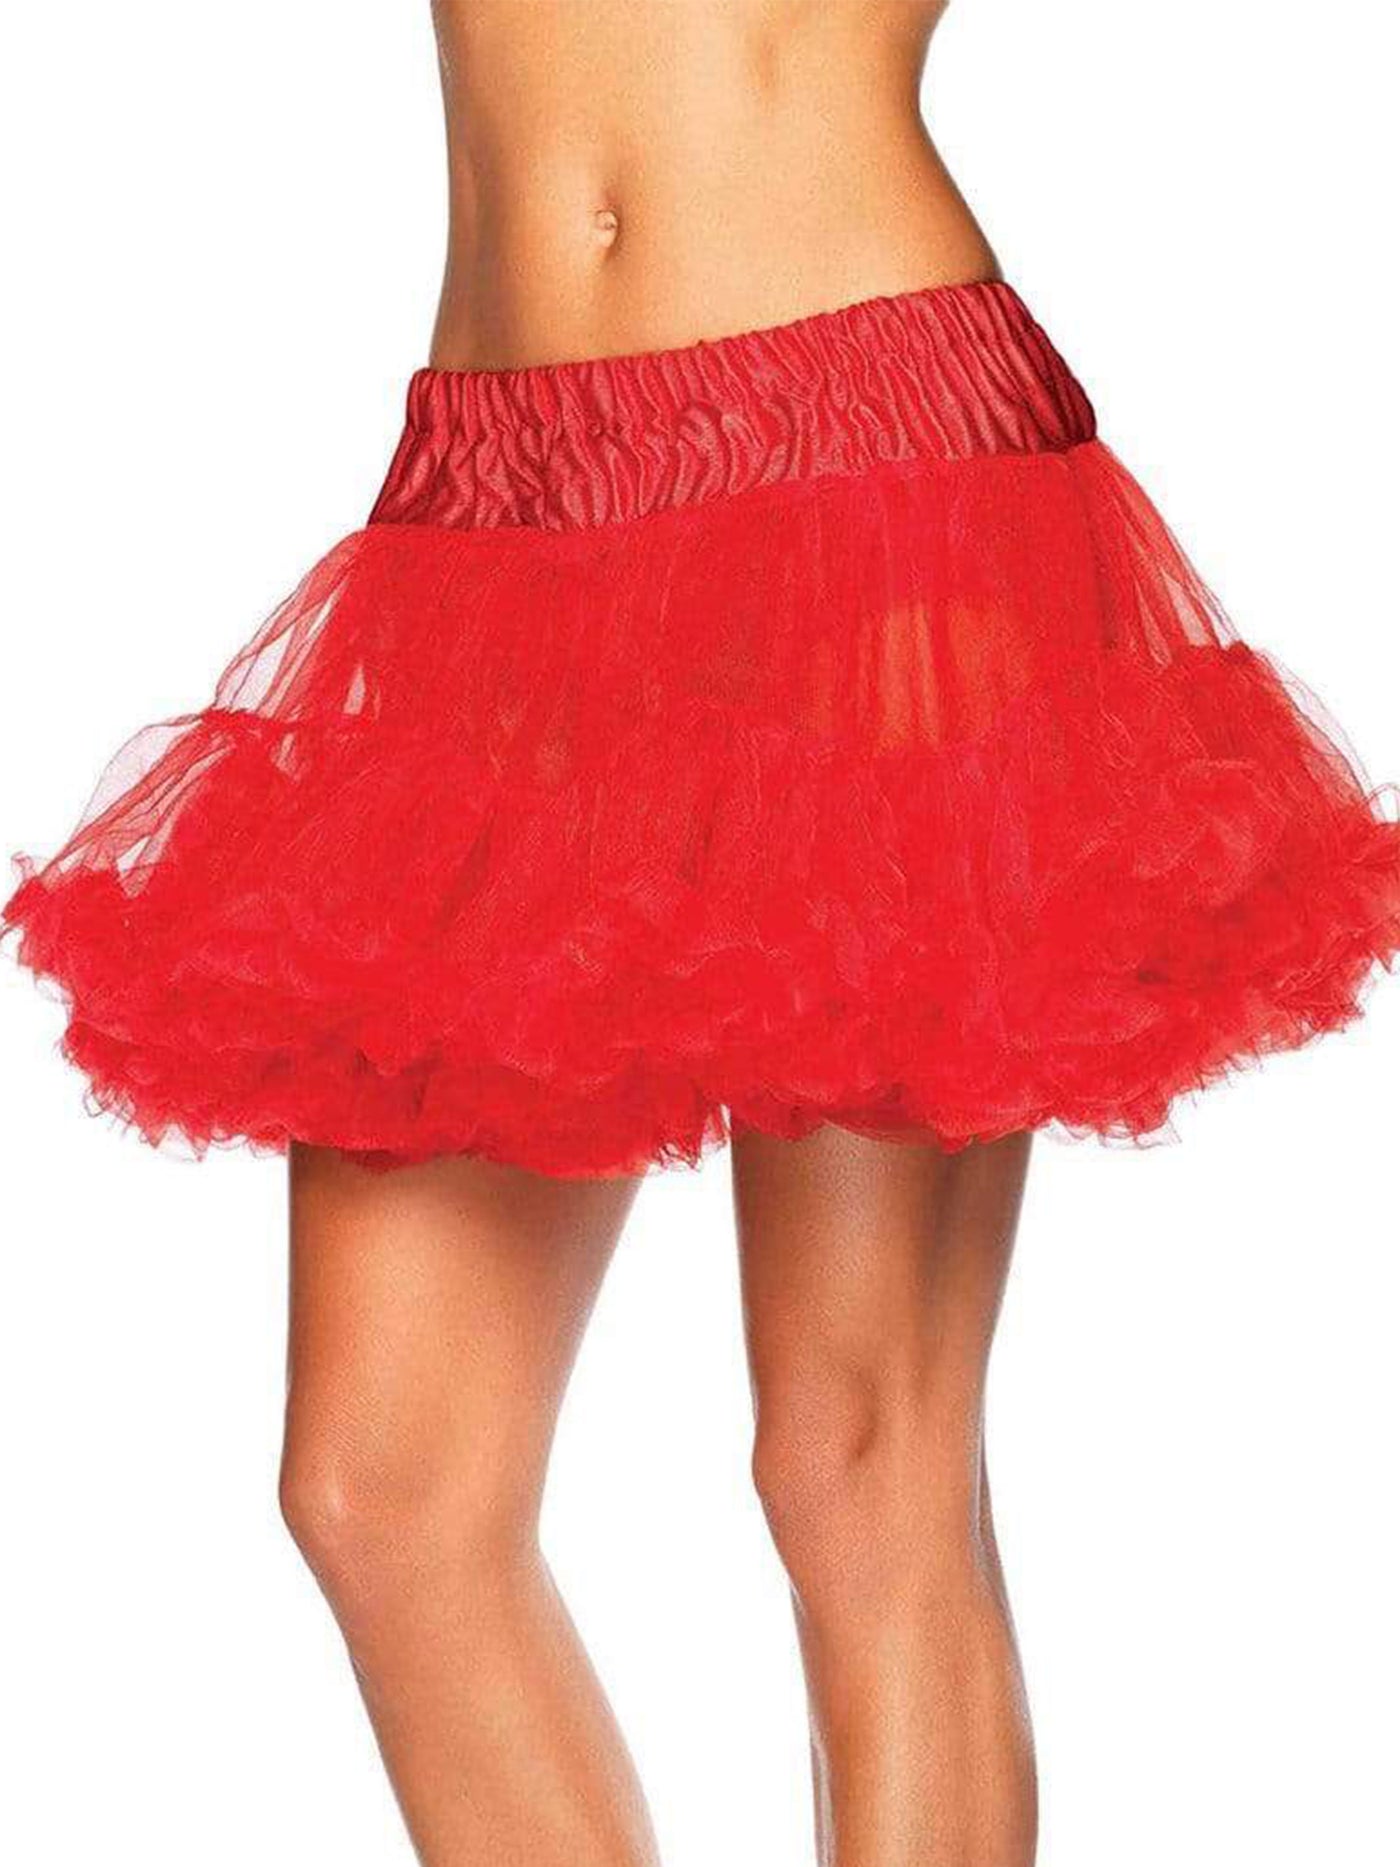 Red Layered Tulle Petticoat - Shop Fortune Costumes Lingerie